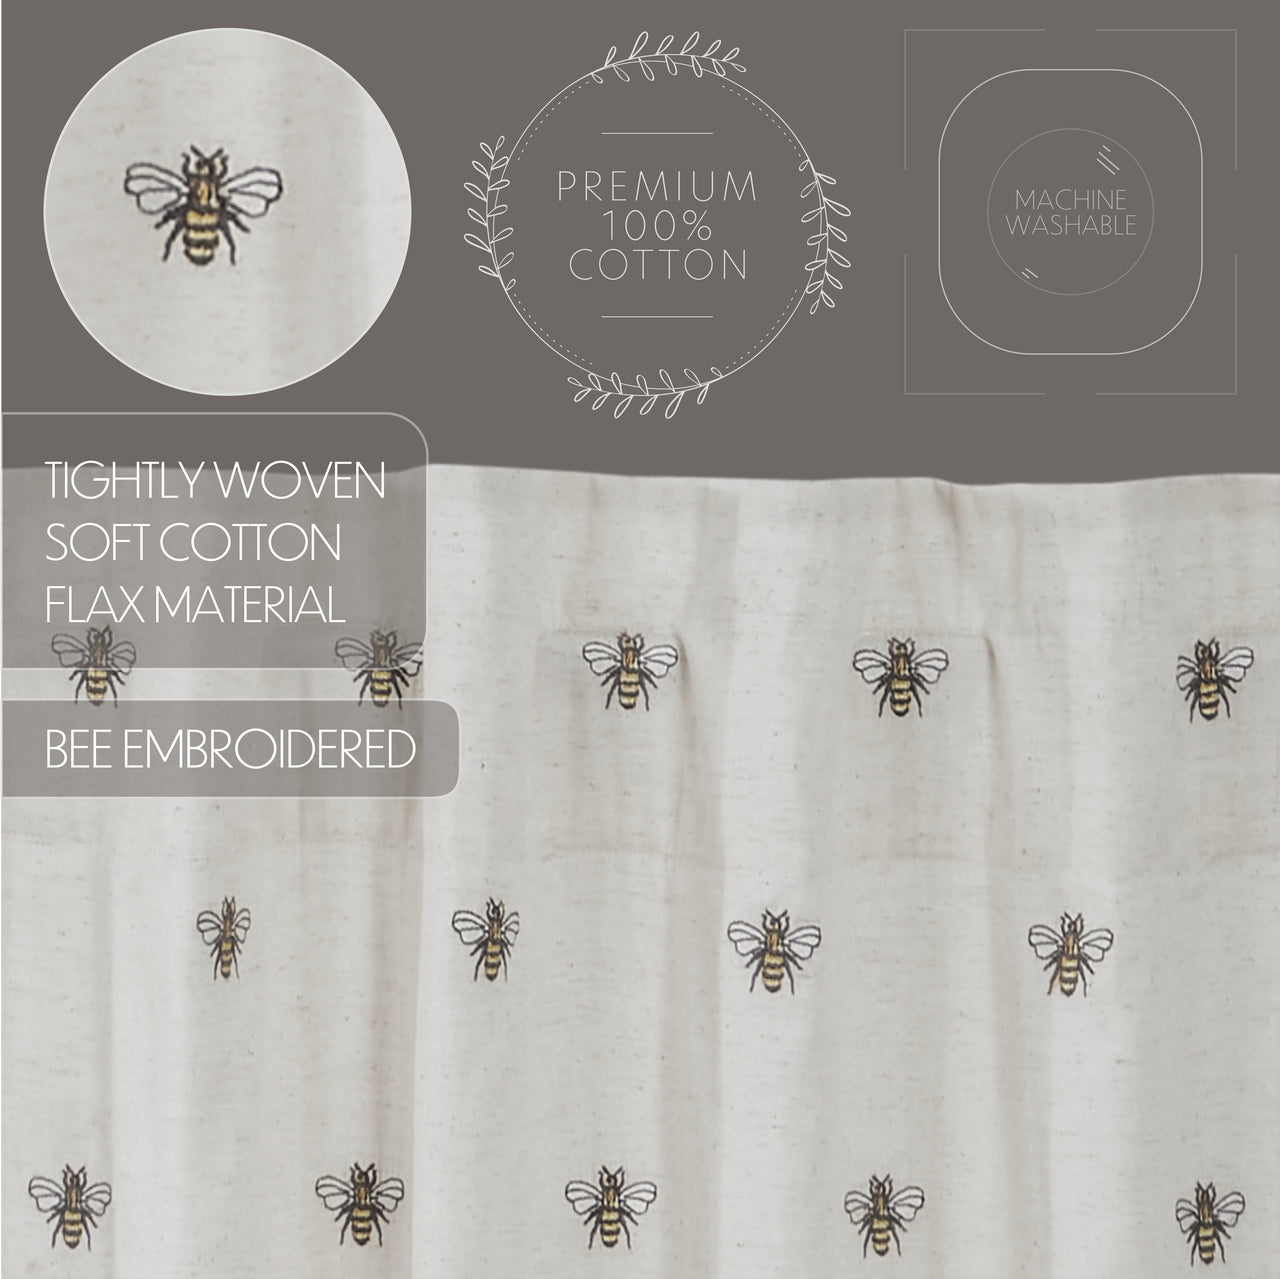 Embroidered Bee Valance Curtain 16"x90" VHC Brands